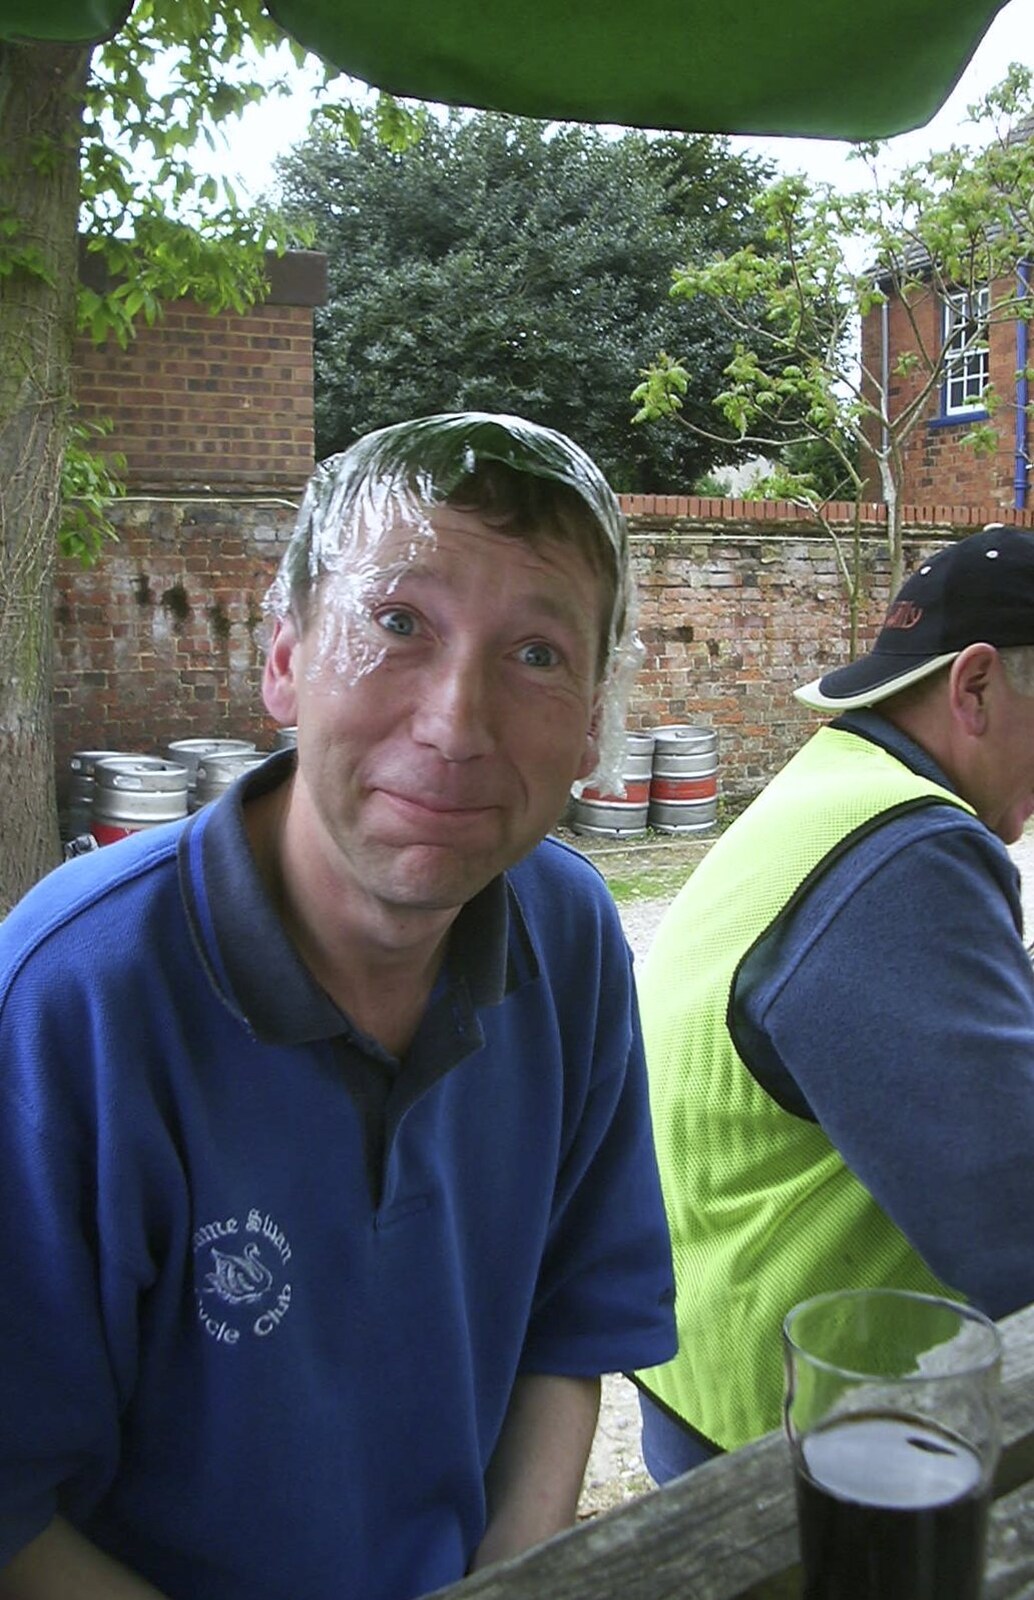 The BSCC Bike Ride, Shefford, Bedford - 11th May 2002: Apple with cling-film on his head